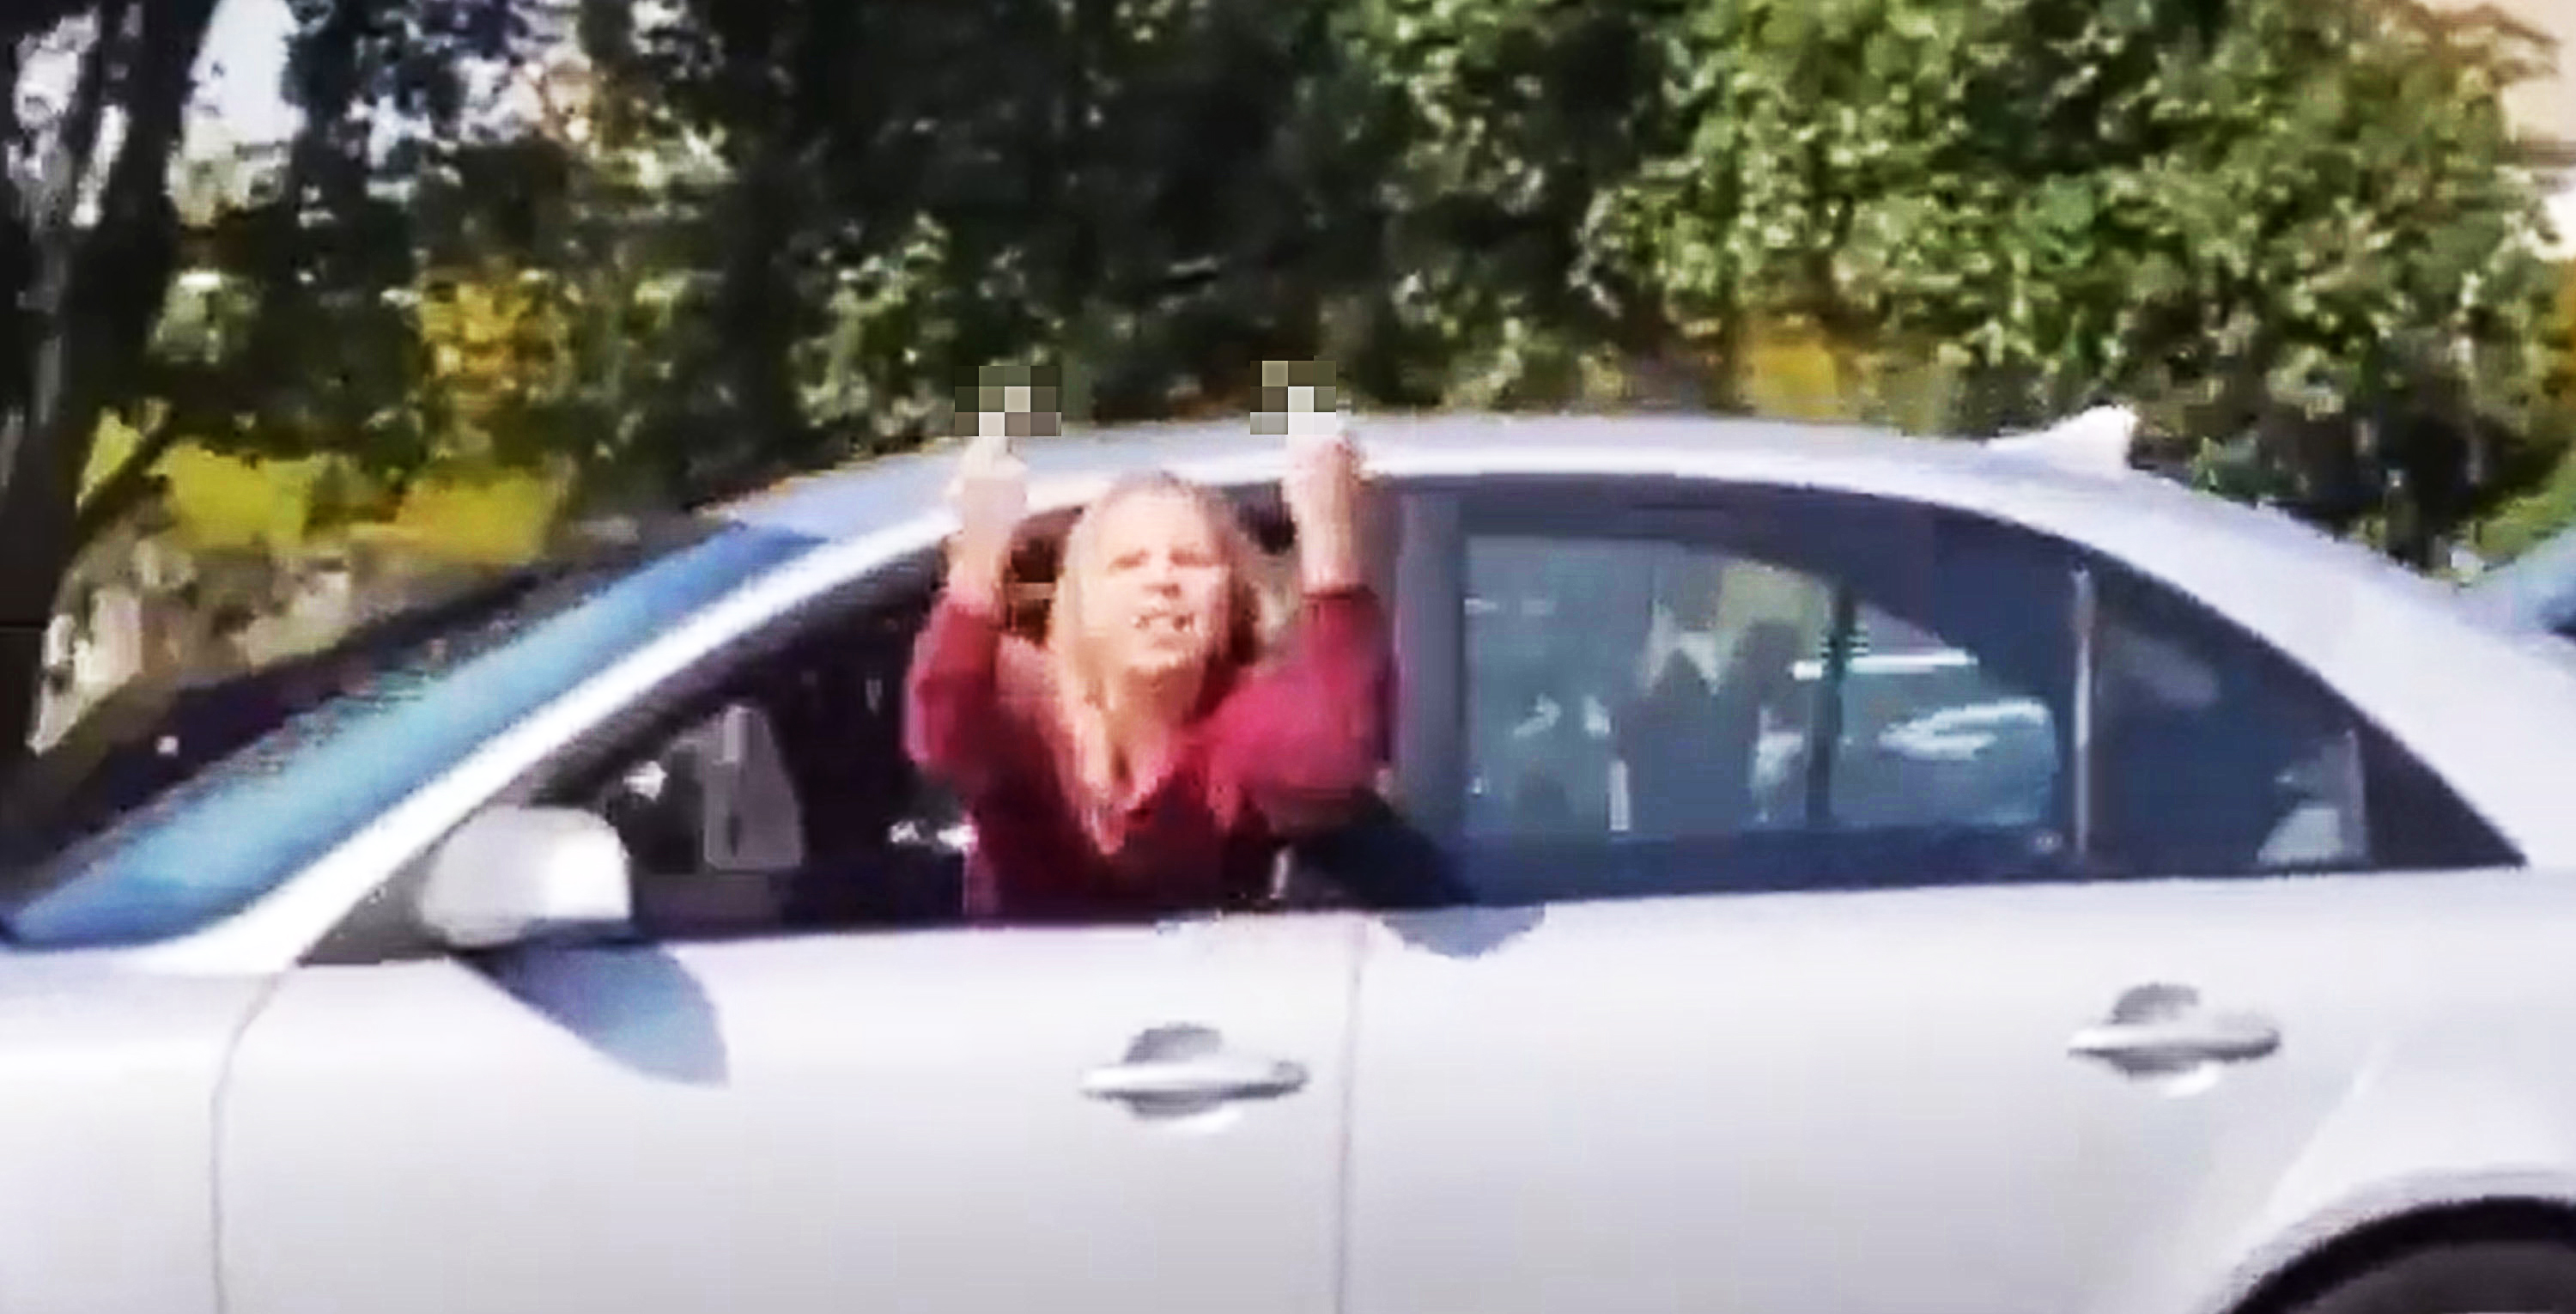 CANCEL CULTURE: Viral video shows woman flipping off Trump supporters, then rear-ending another car in front of police